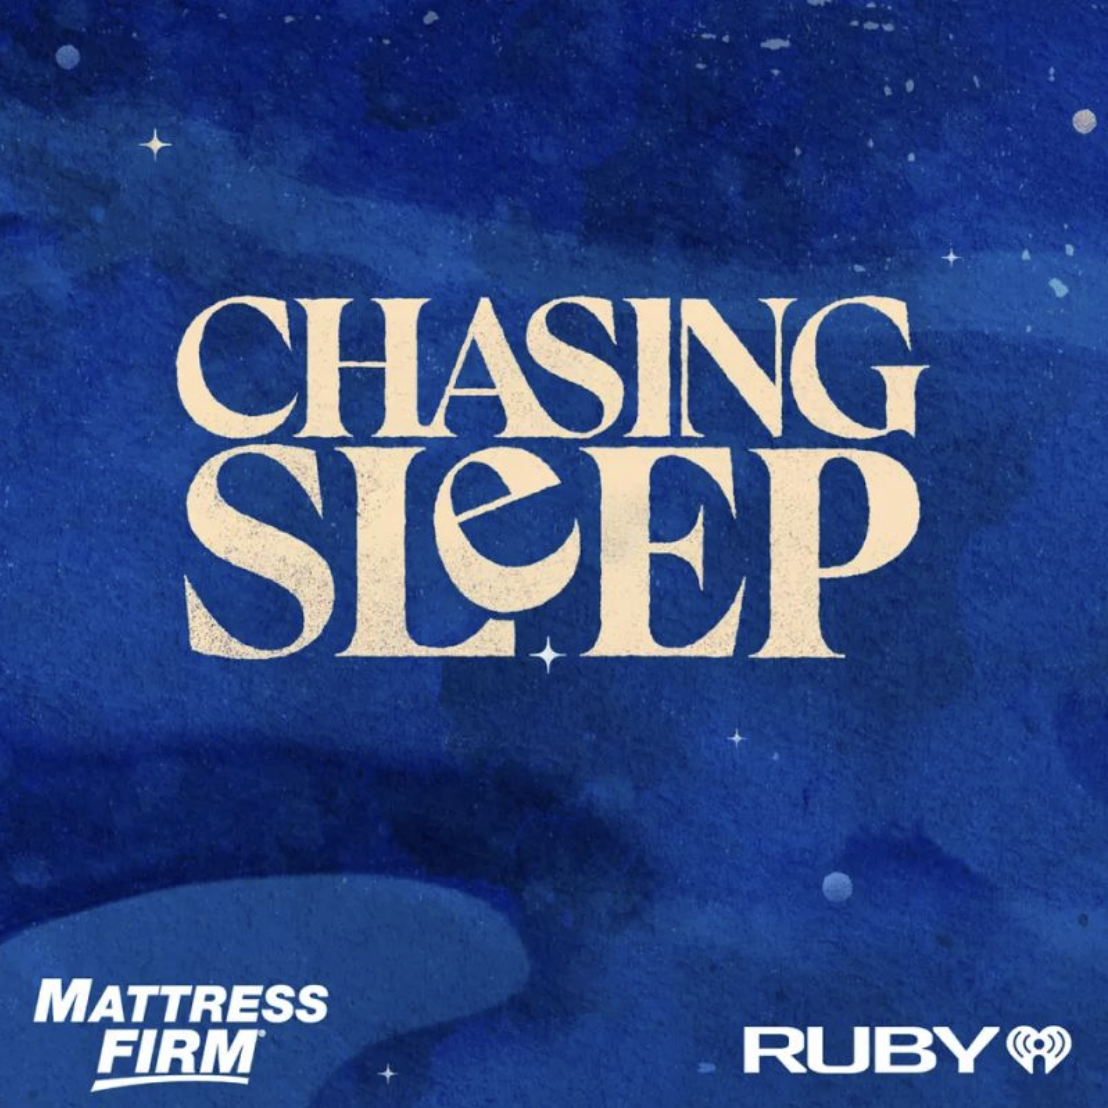 Our Client Mattress Firm Wins OMMA Award and Signal Award for "Chasing Sleep" Podcast